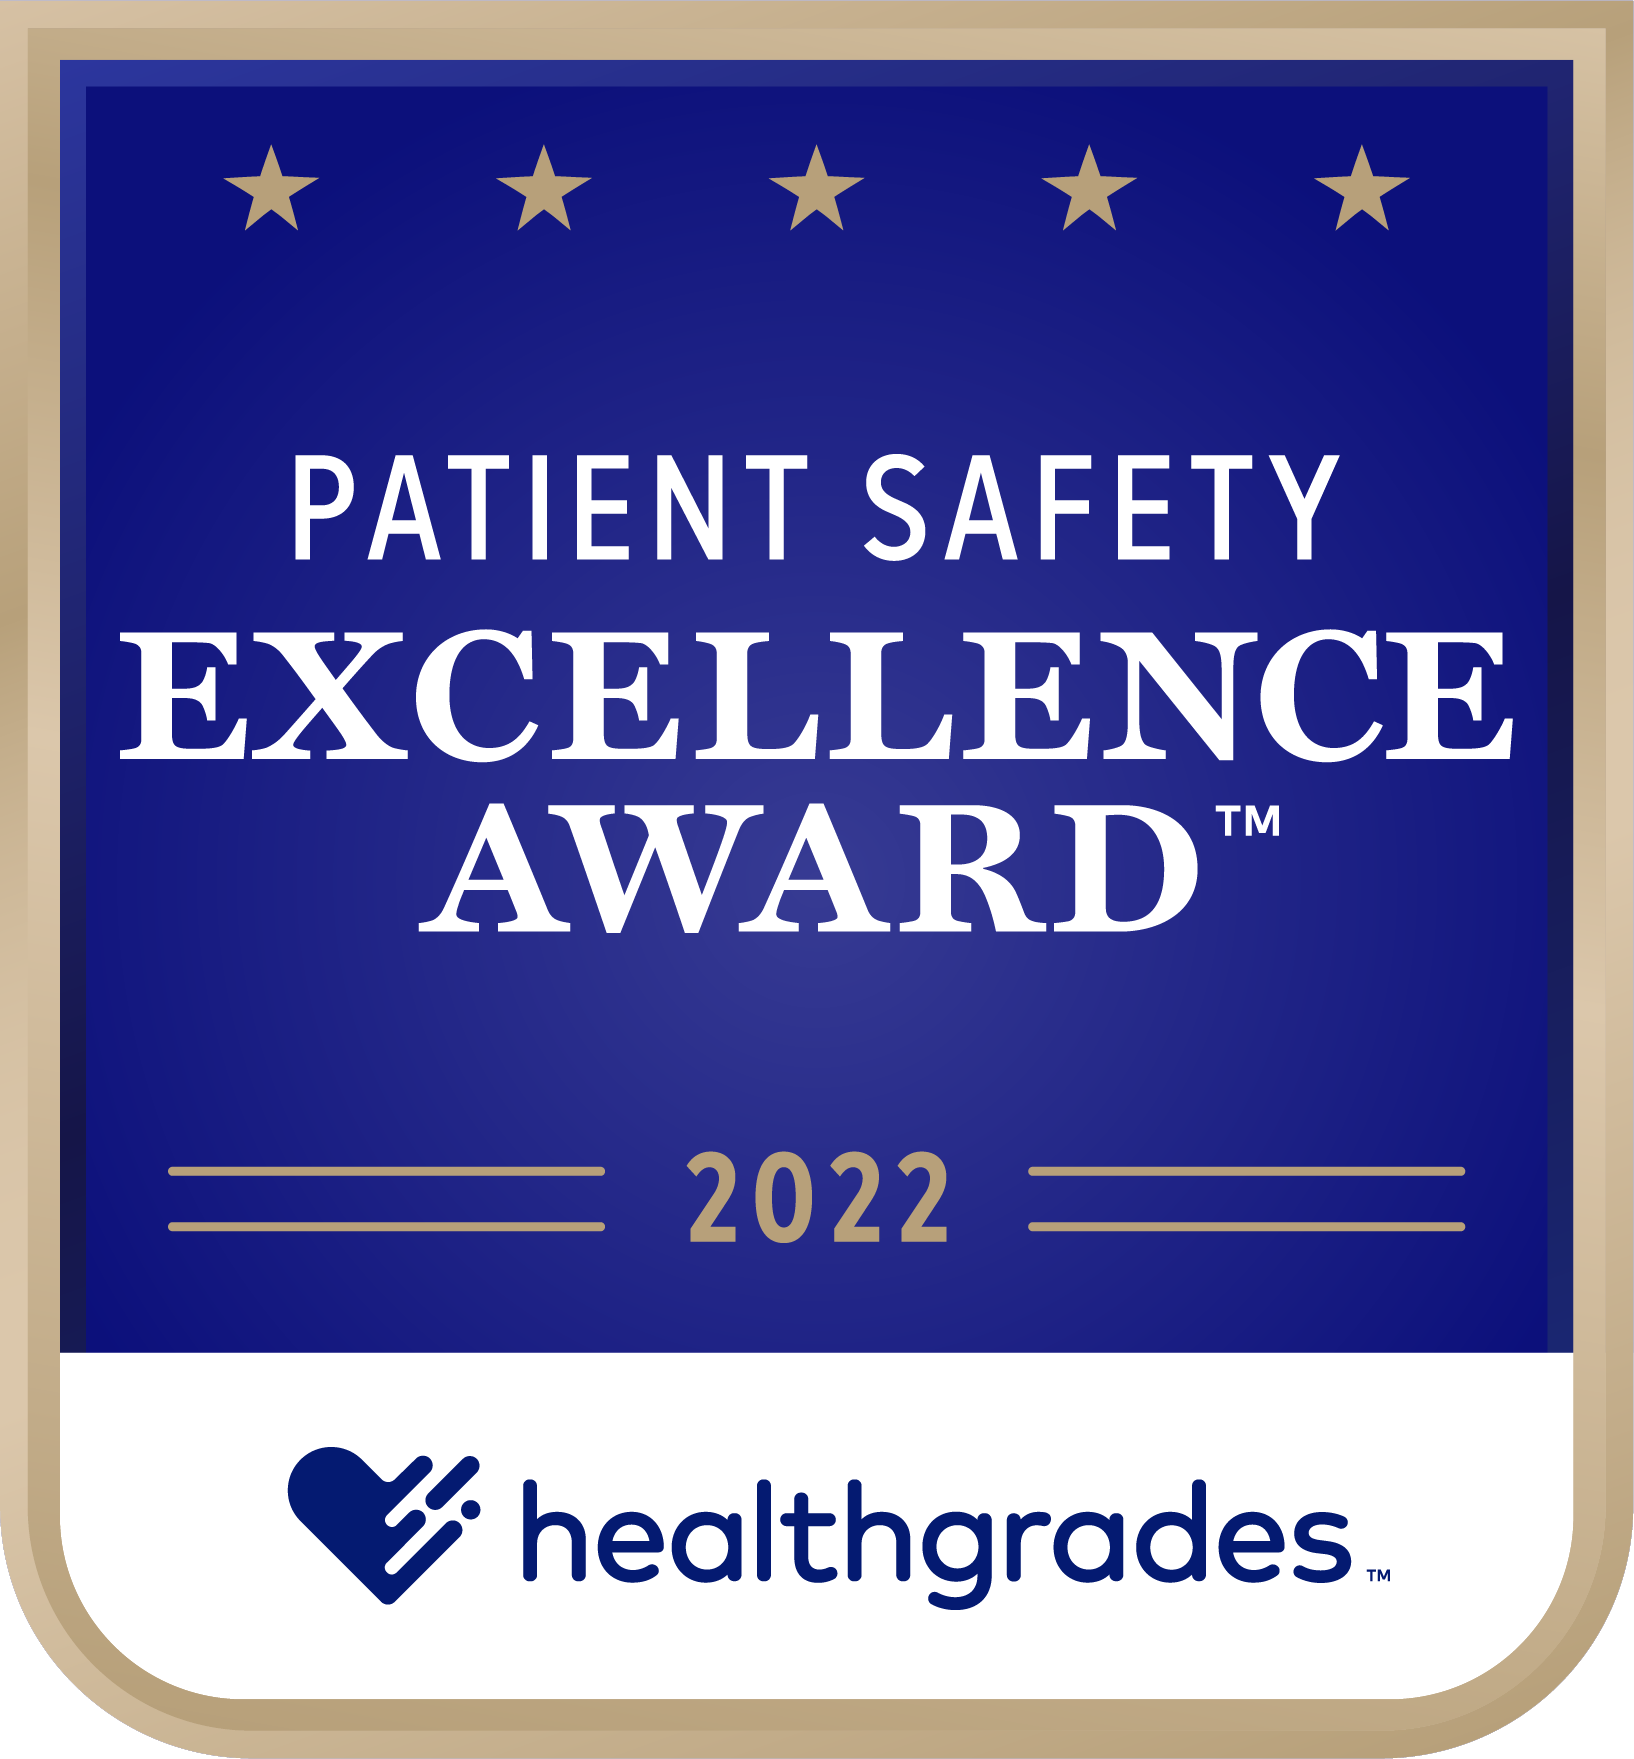 Healthgrades 2022 Patient Safety Excellence Award